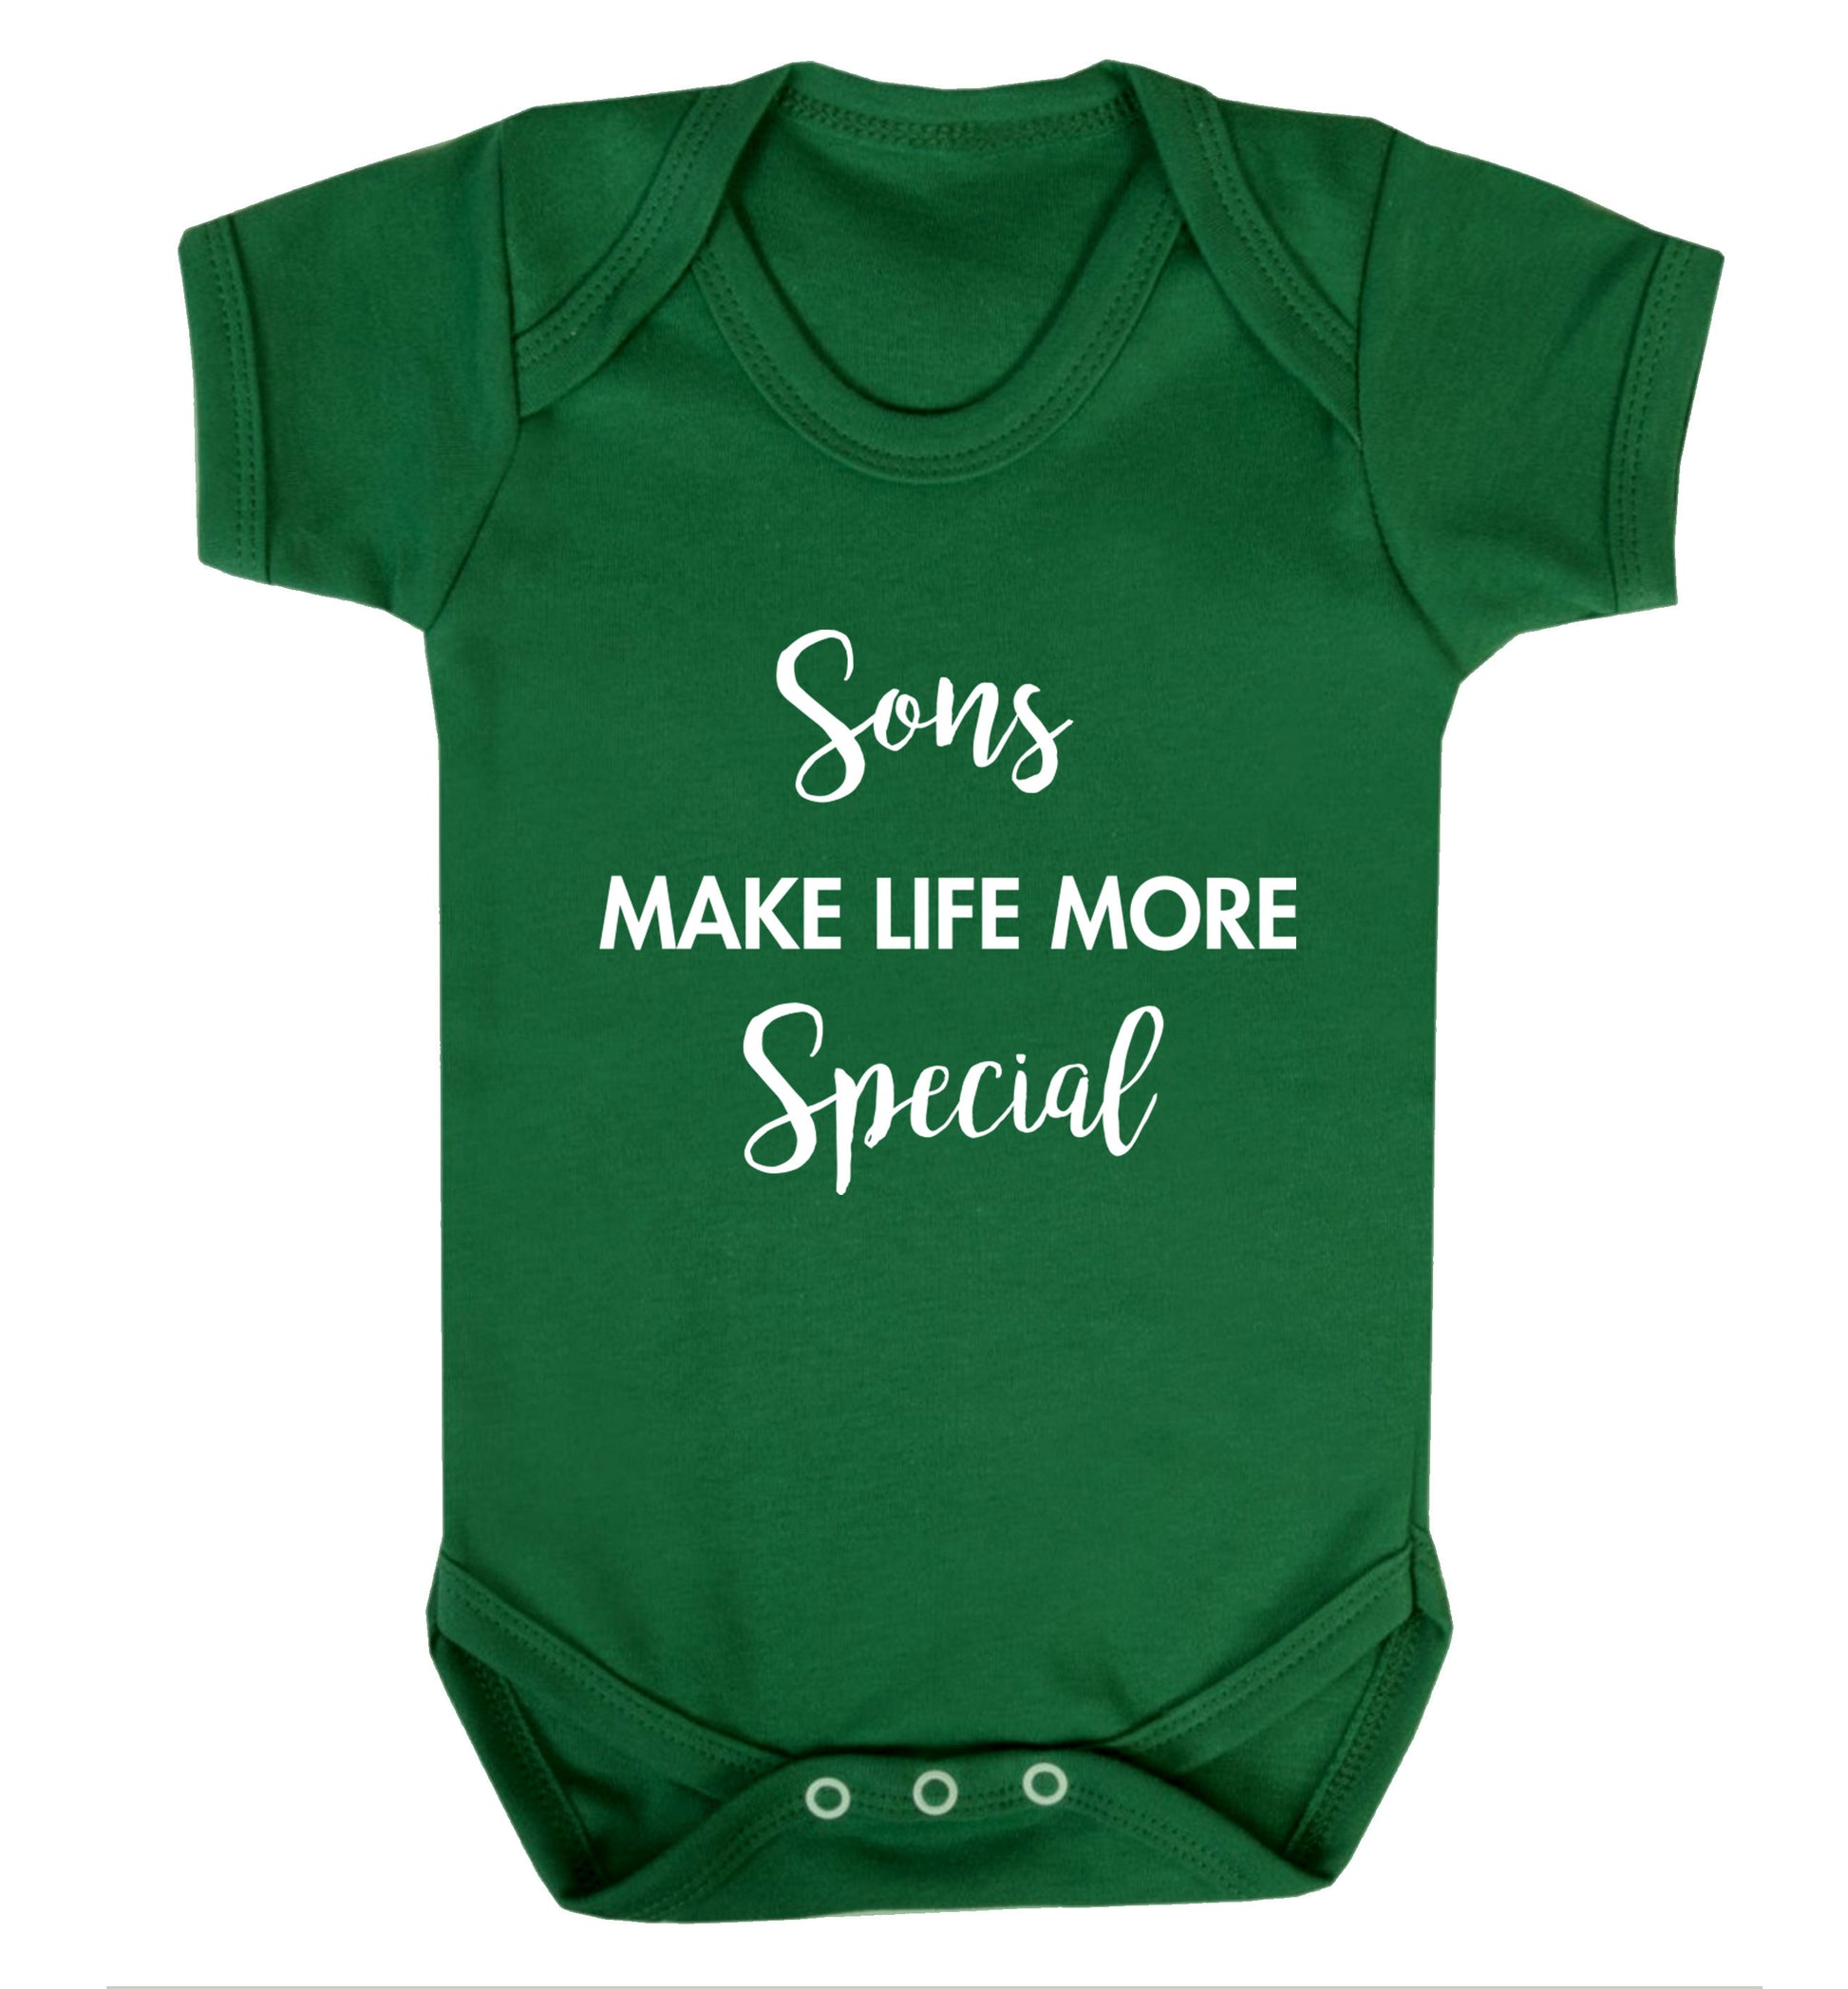 Sons make life more special Baby Vest green 18-24 months